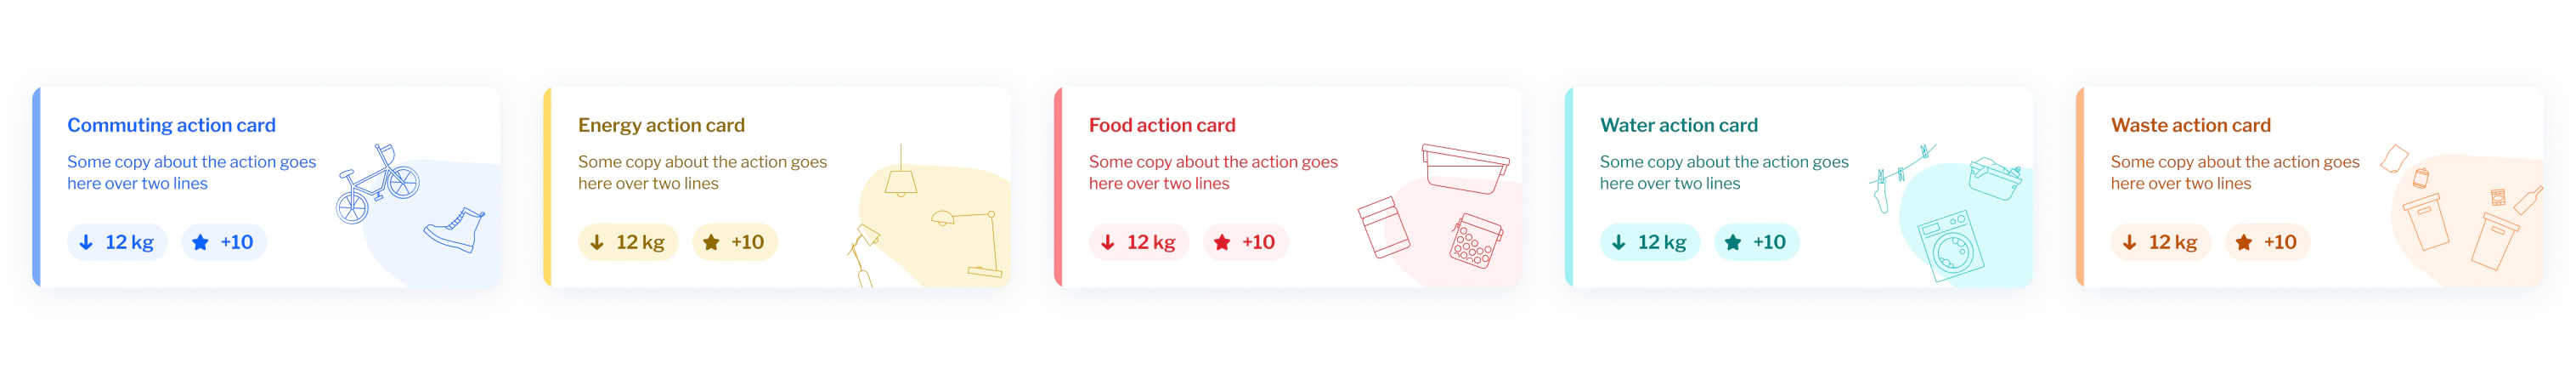 A row of colourful cards showing the different types of sustainable actions available in the app